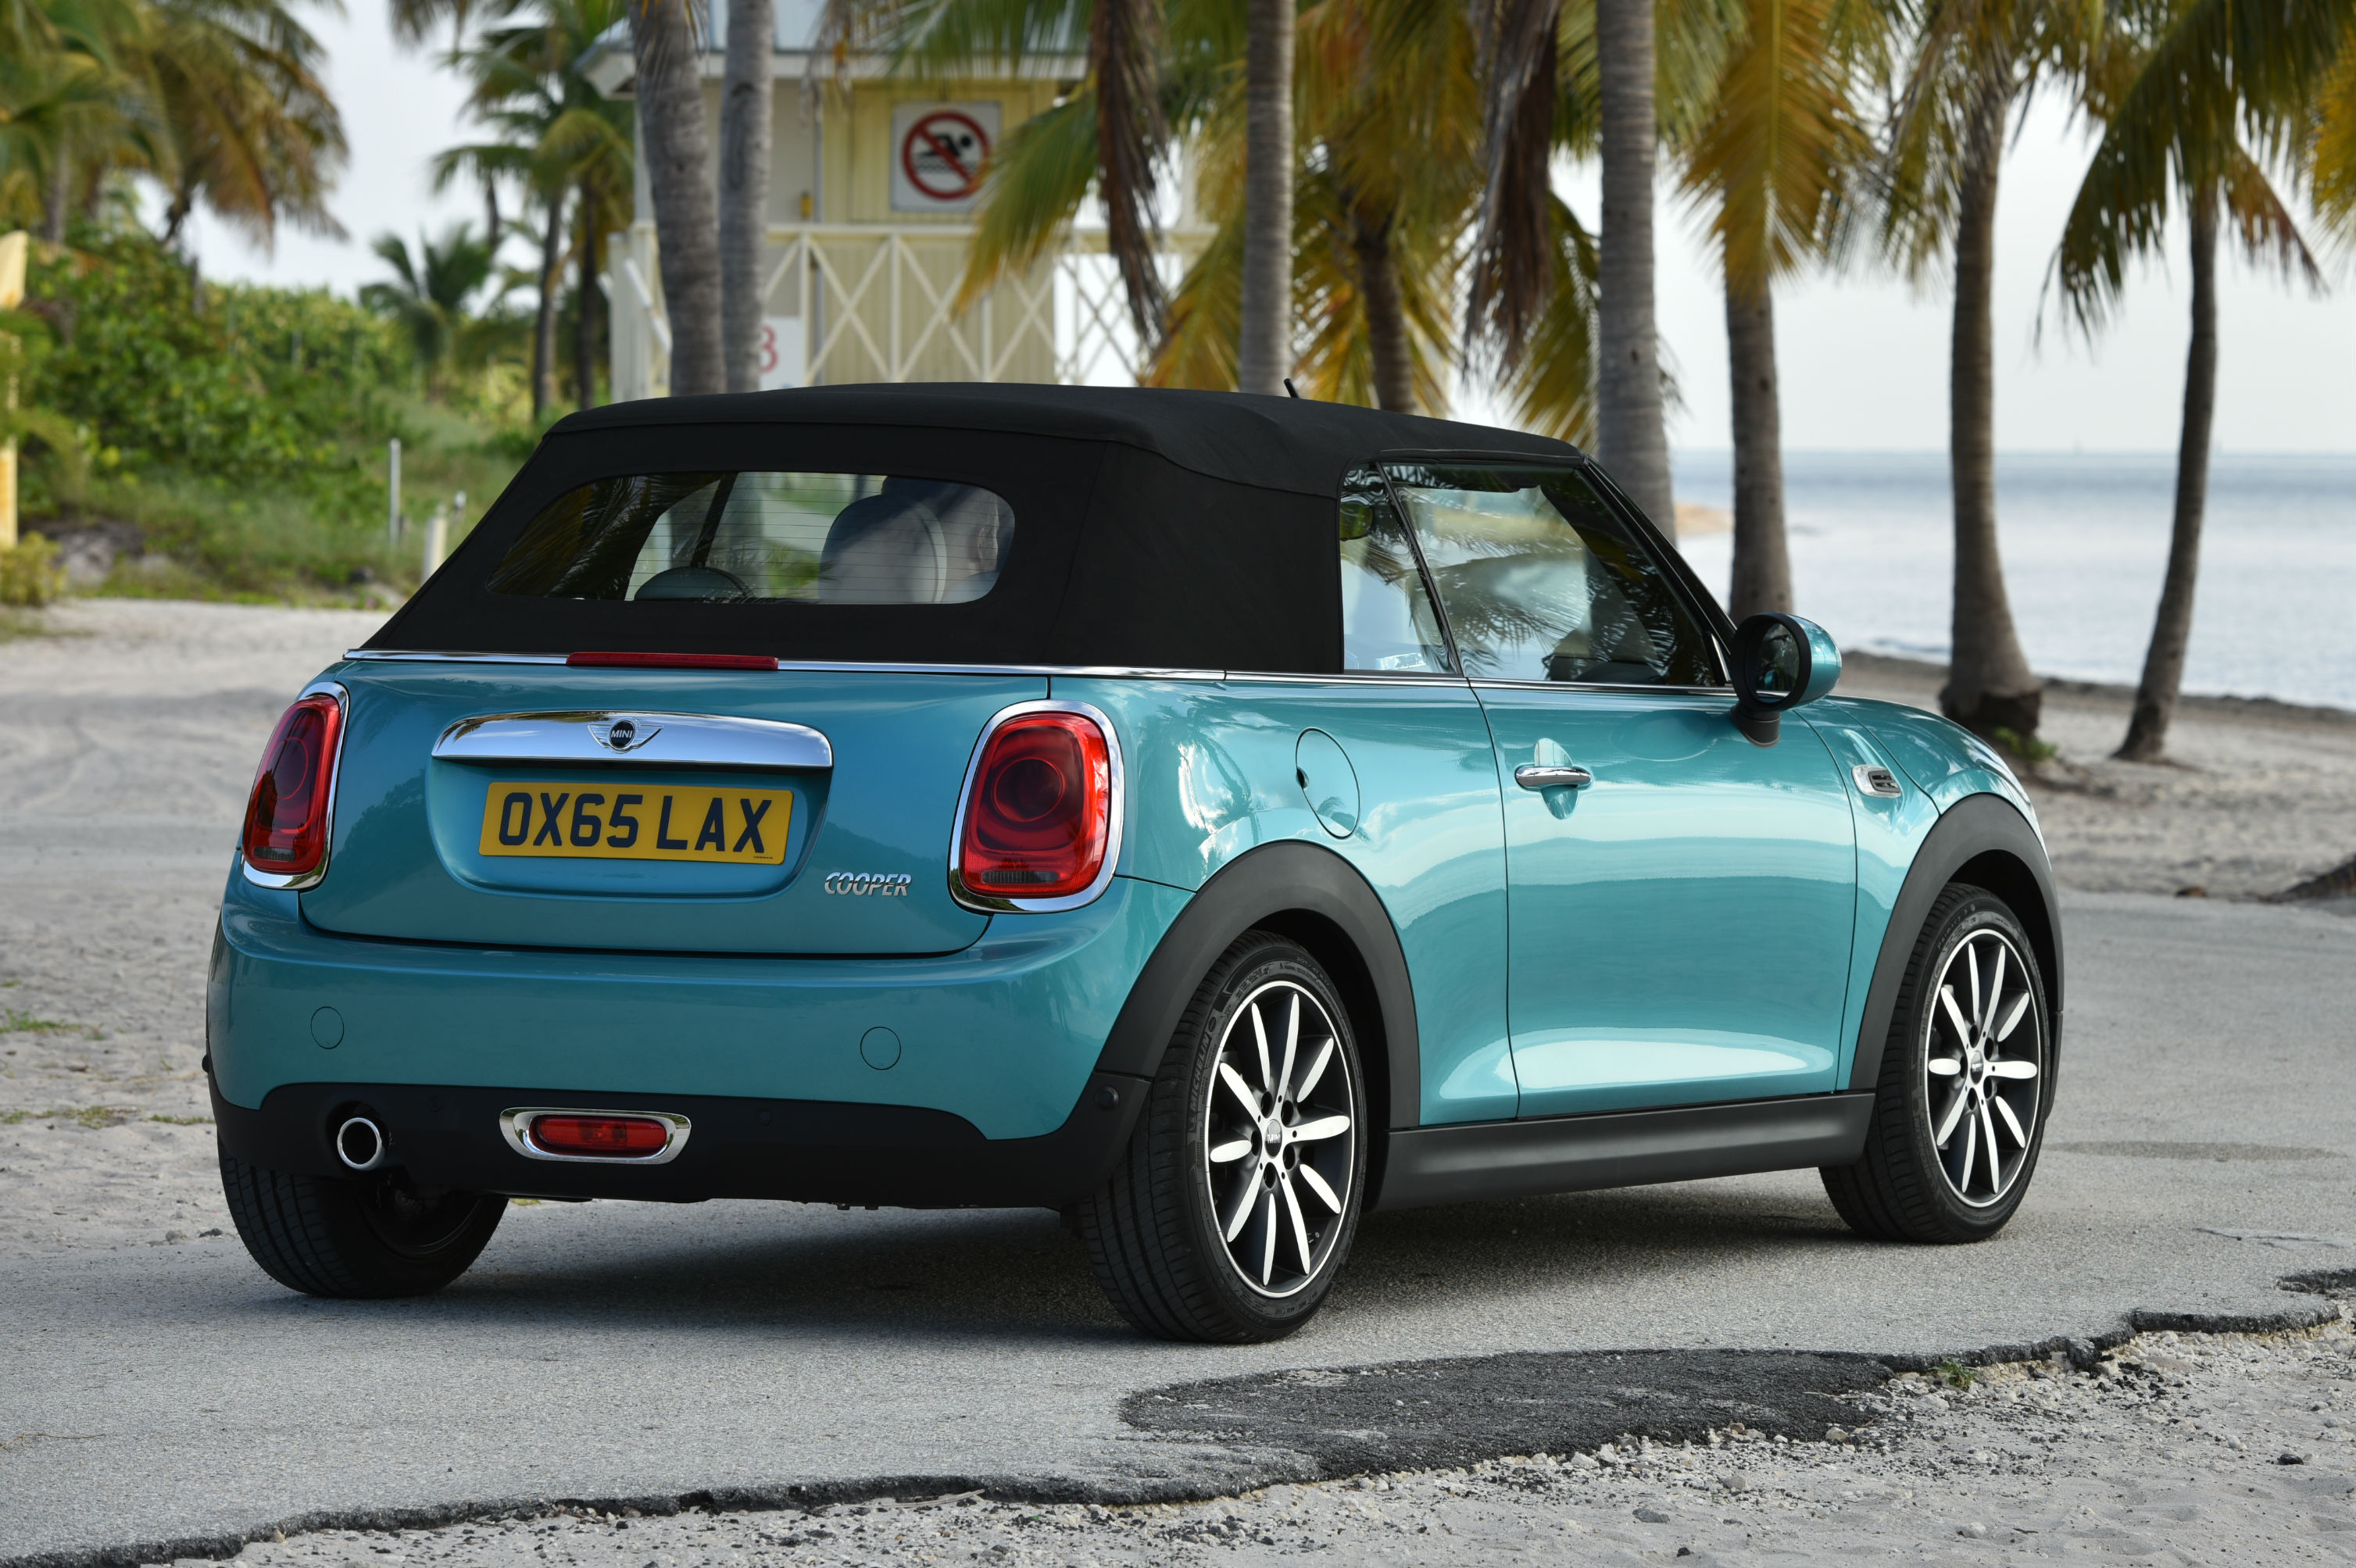 New 2015 Mini convertible first pictures, prices and details